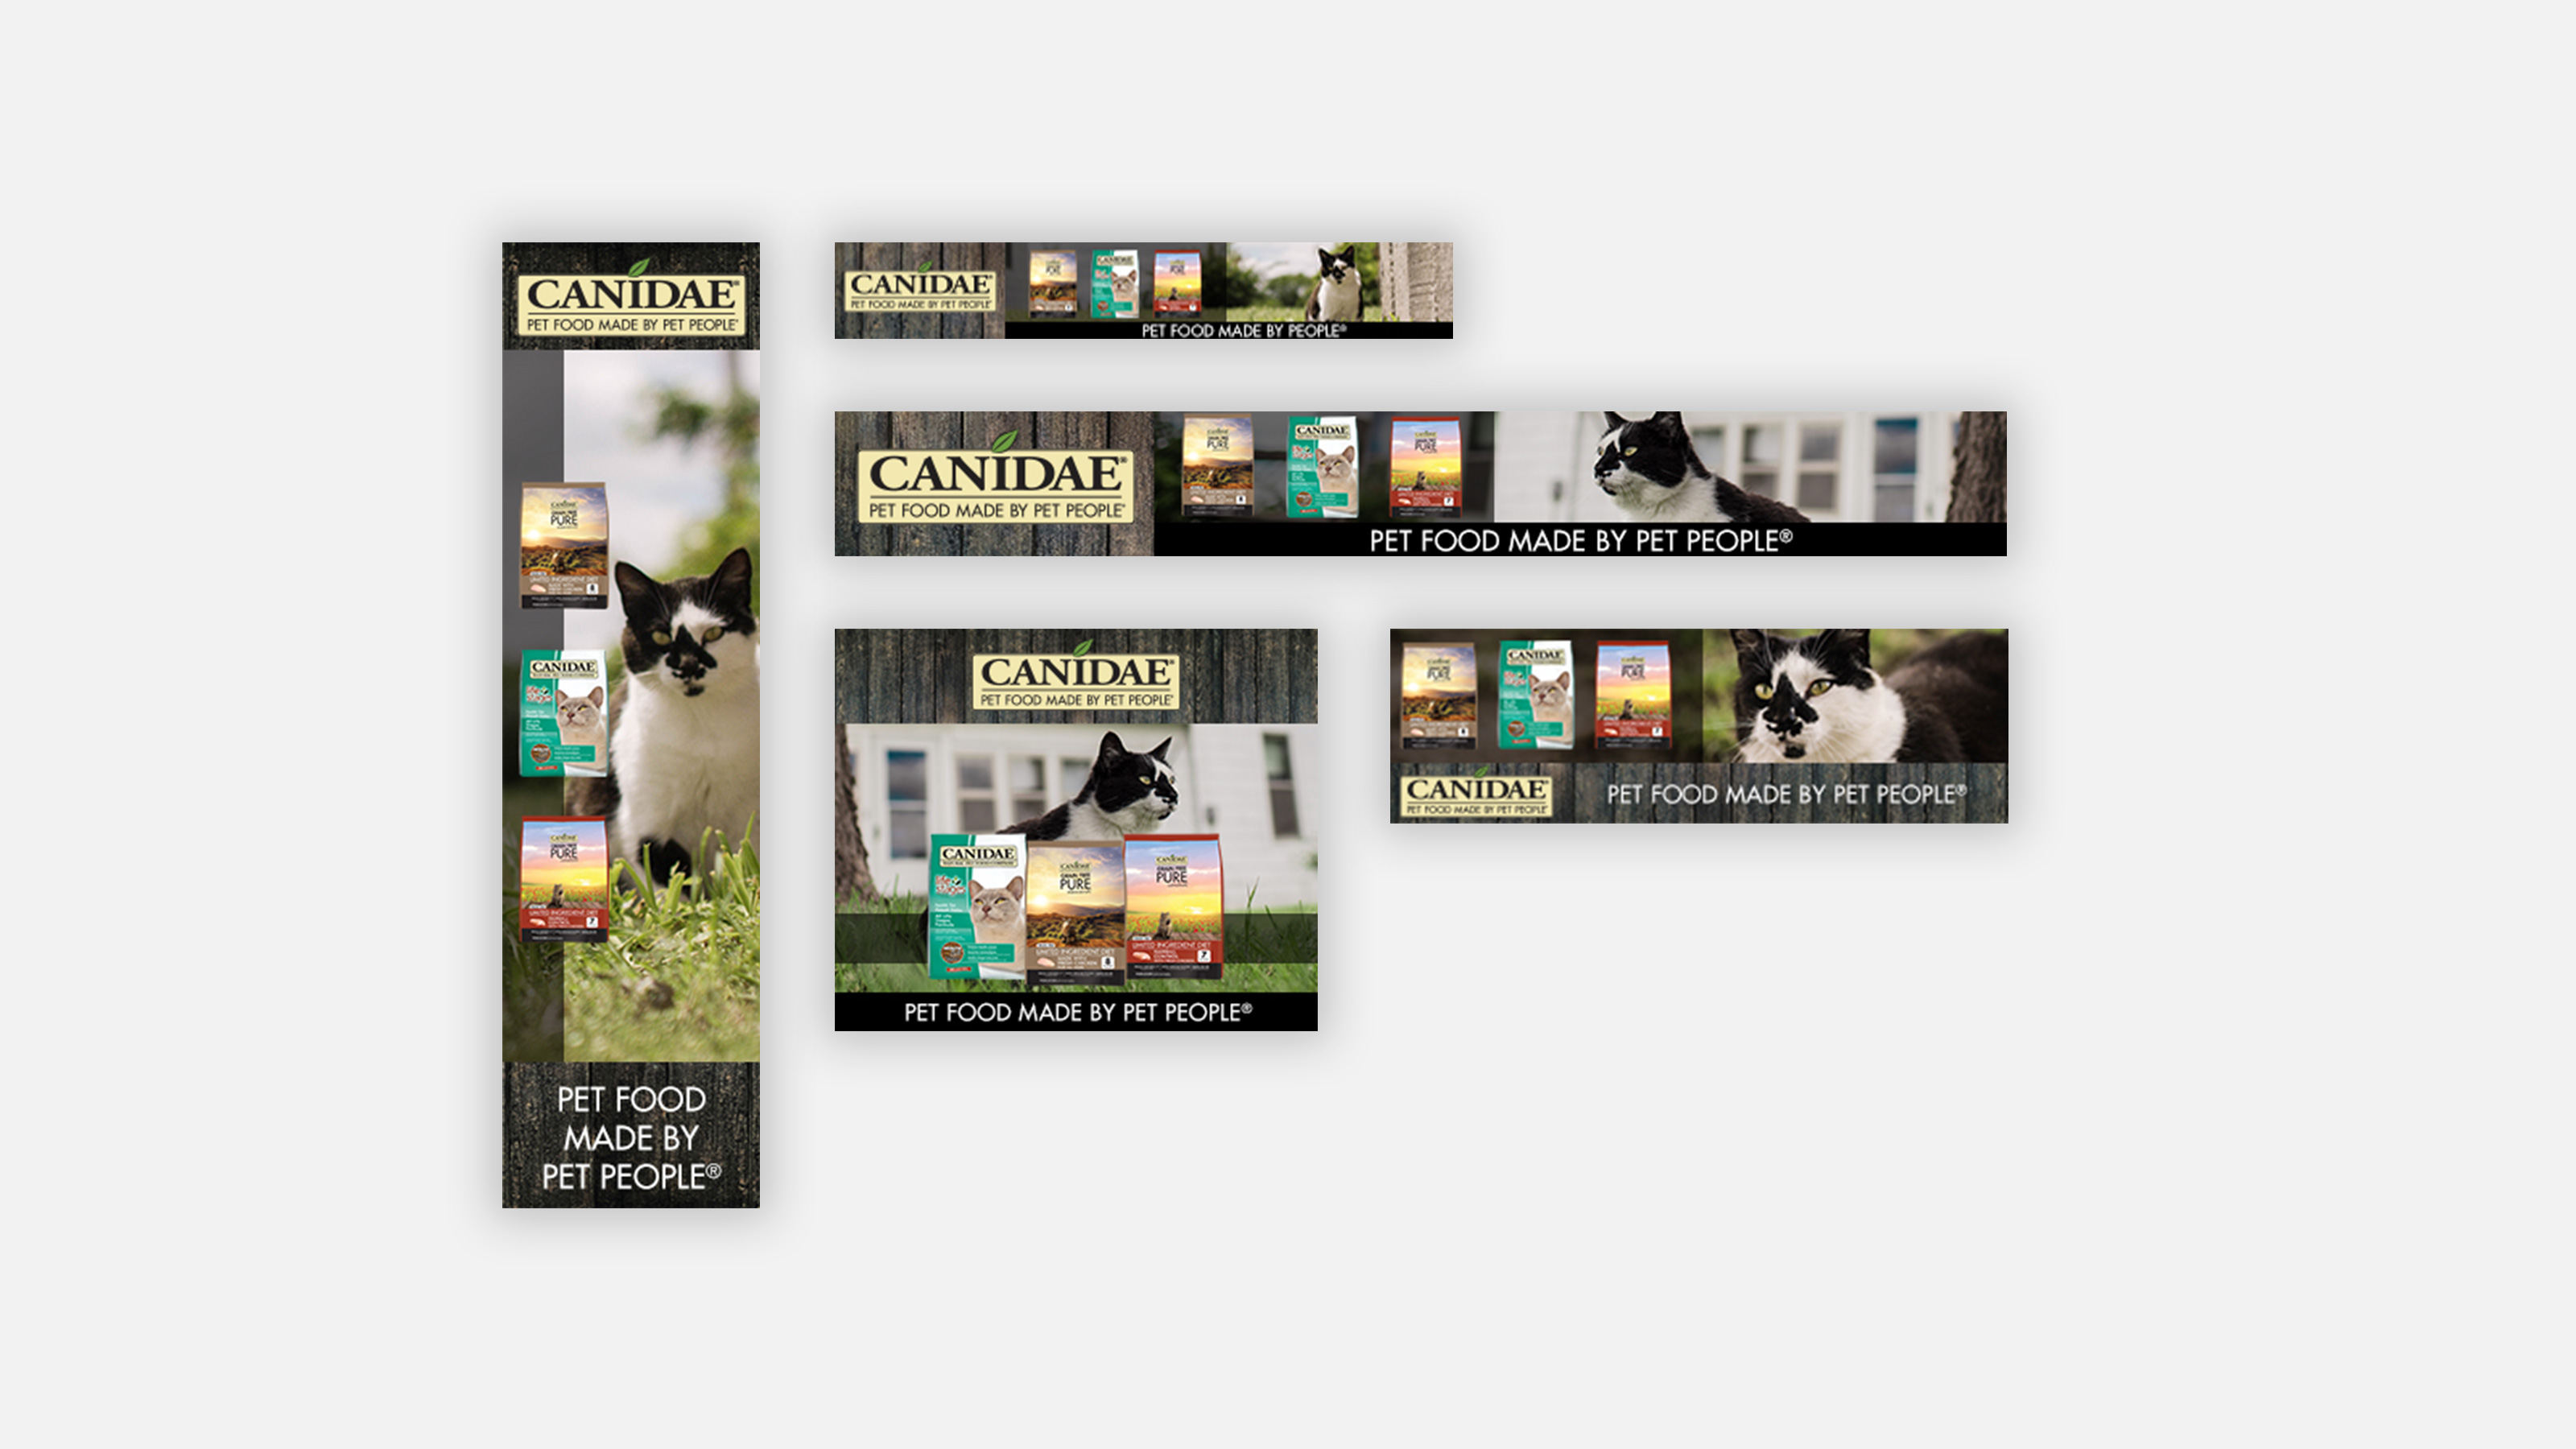 canidae advertising banners with pet food packaging